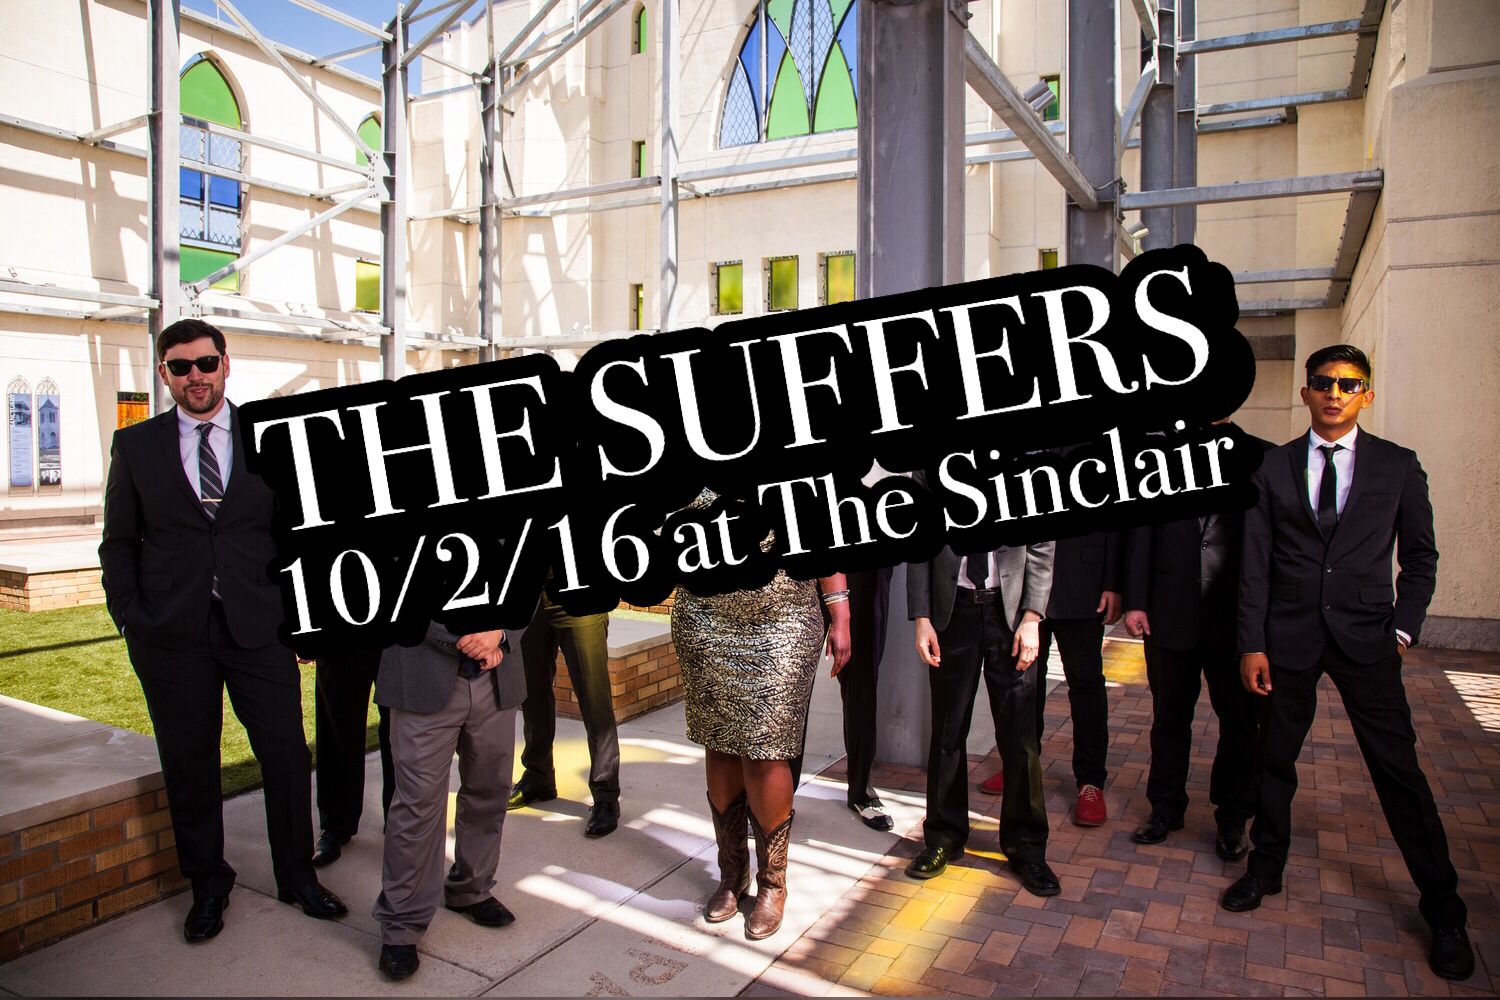 The Suffers @ The Sinclair